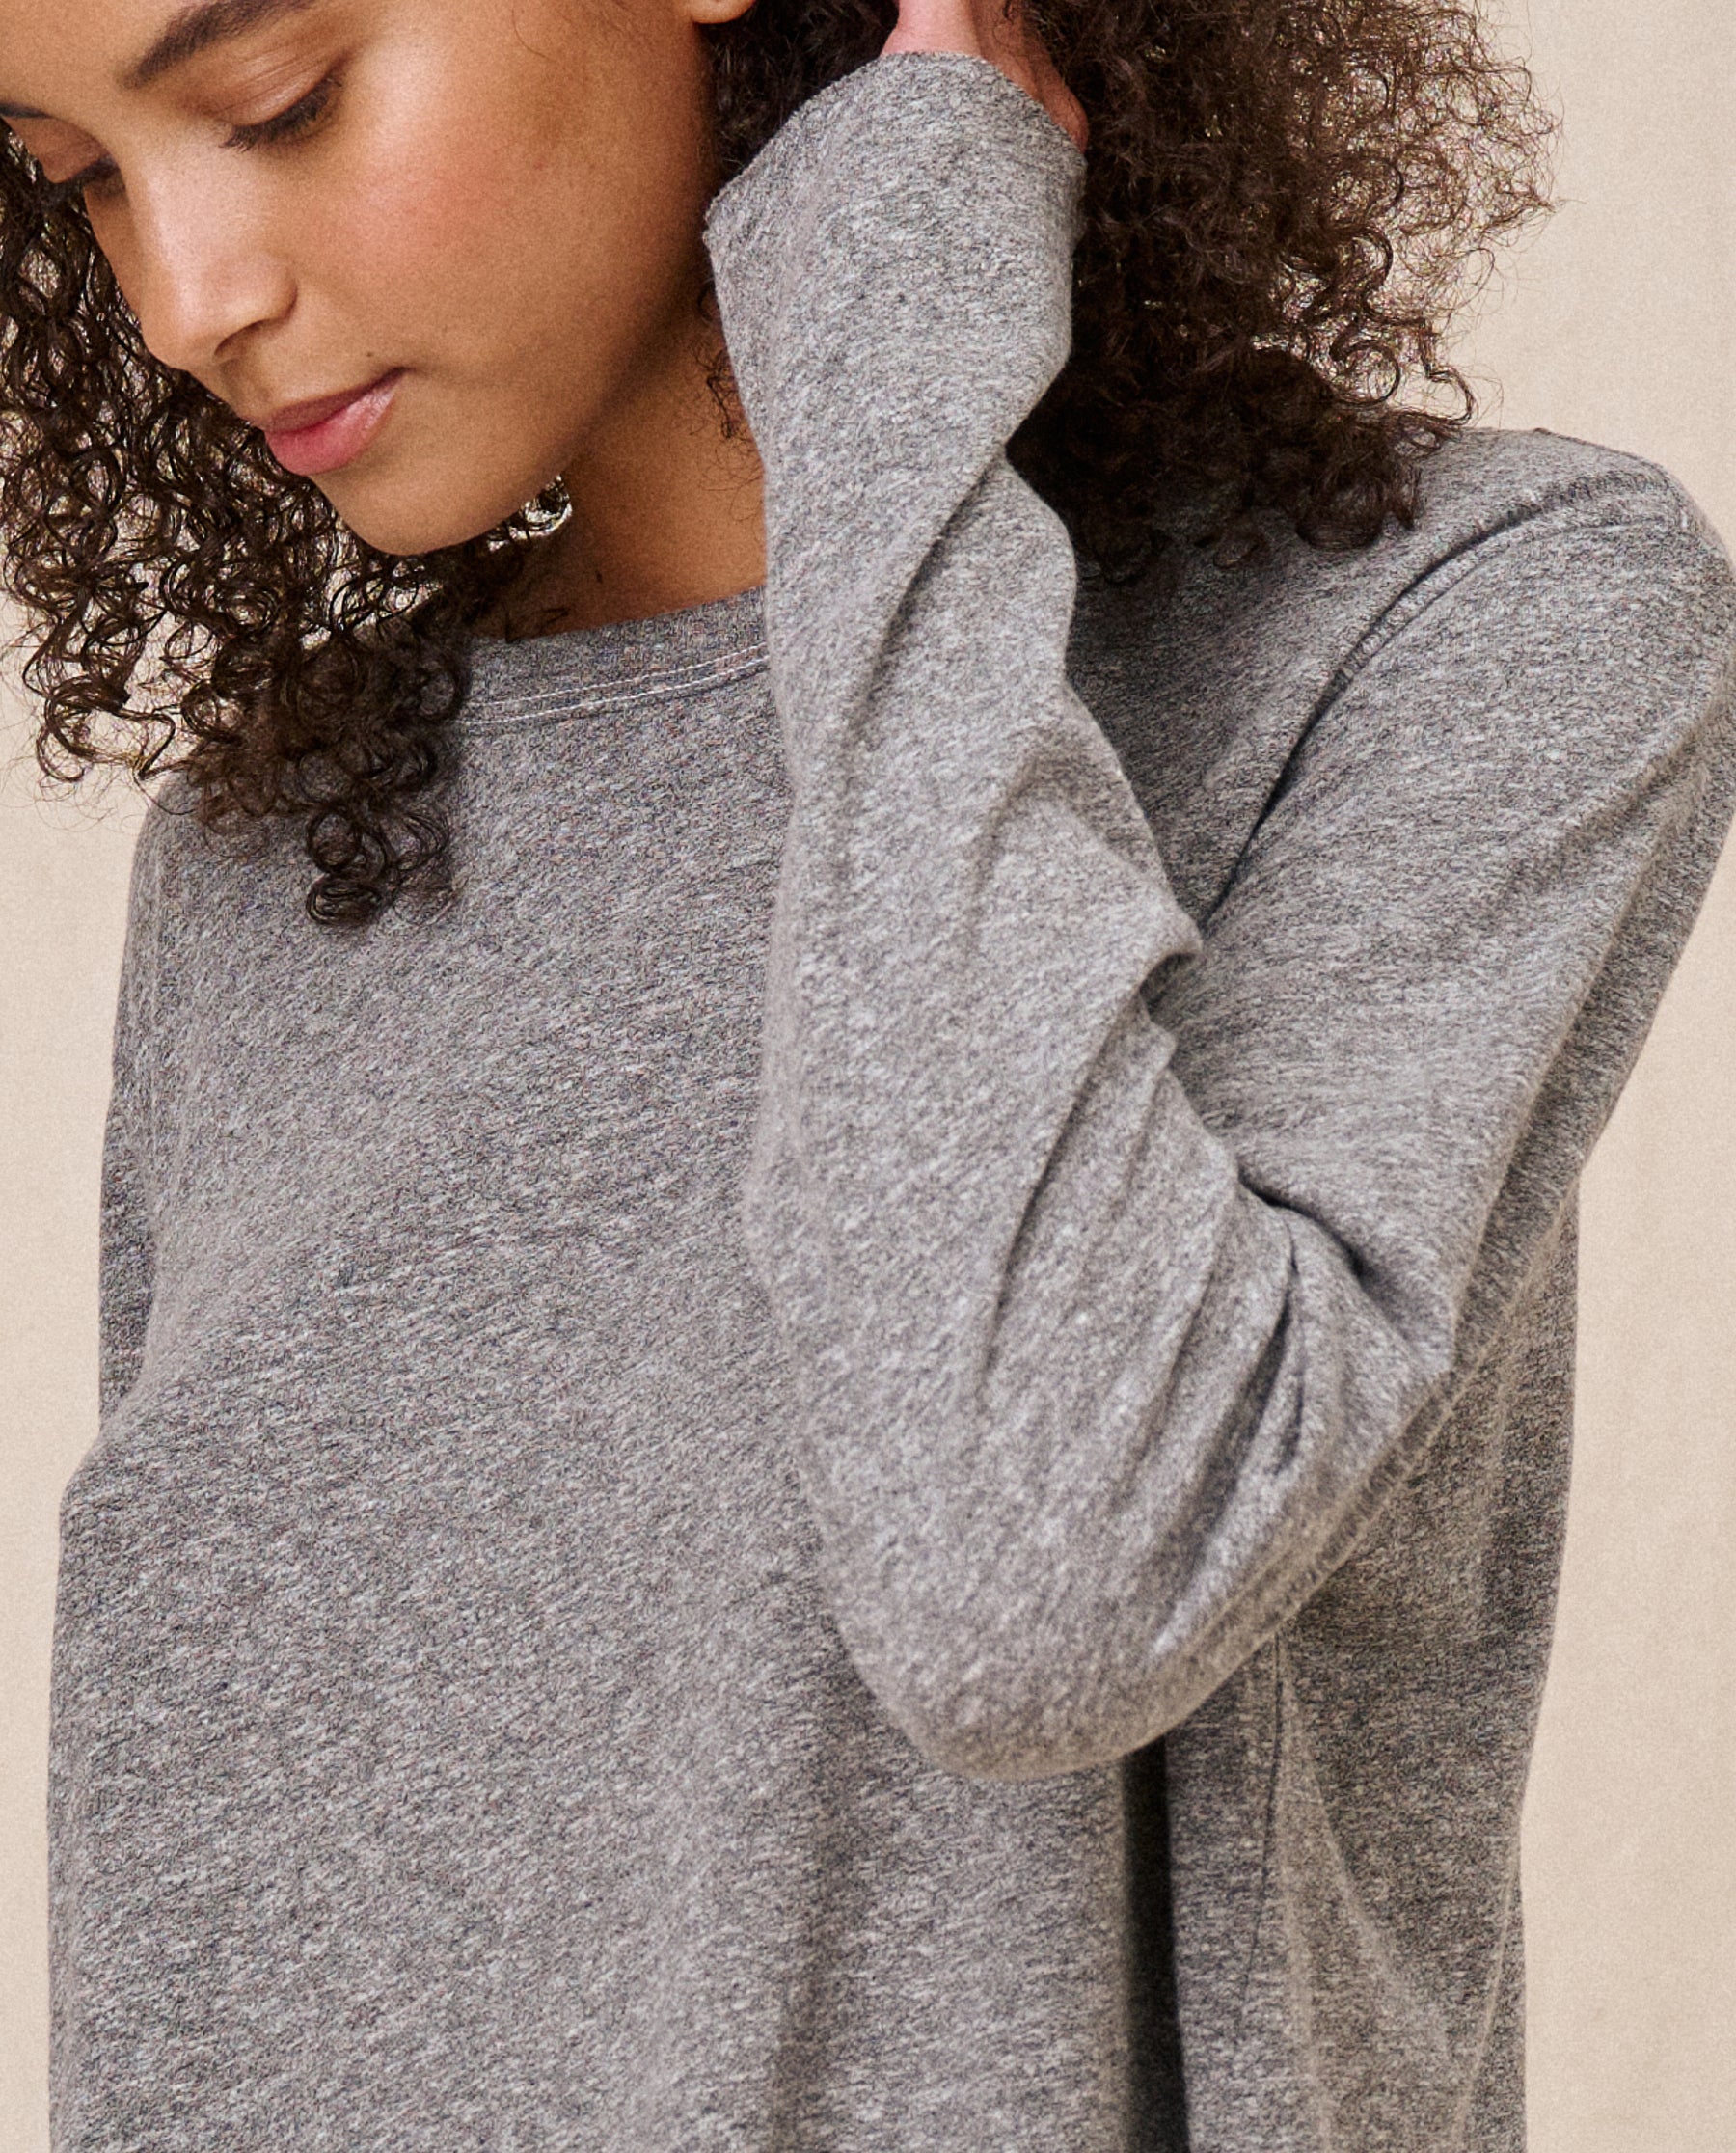 The Long Sleeve Crop Tee. - Heather Grey - THE GREAT. – The Great.